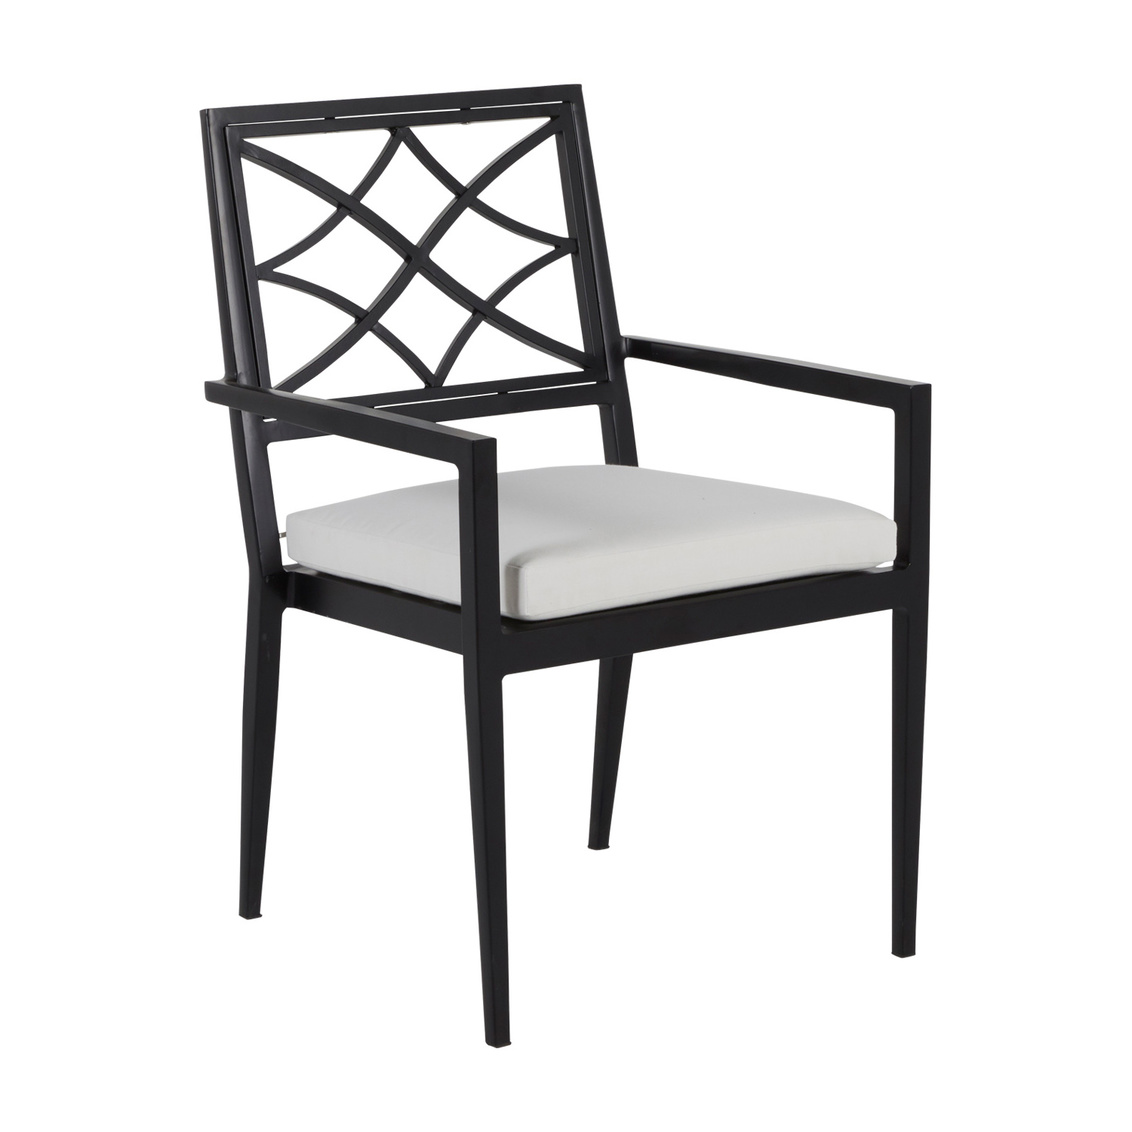 elegante aluminum arm chair in midnight – frame only product image